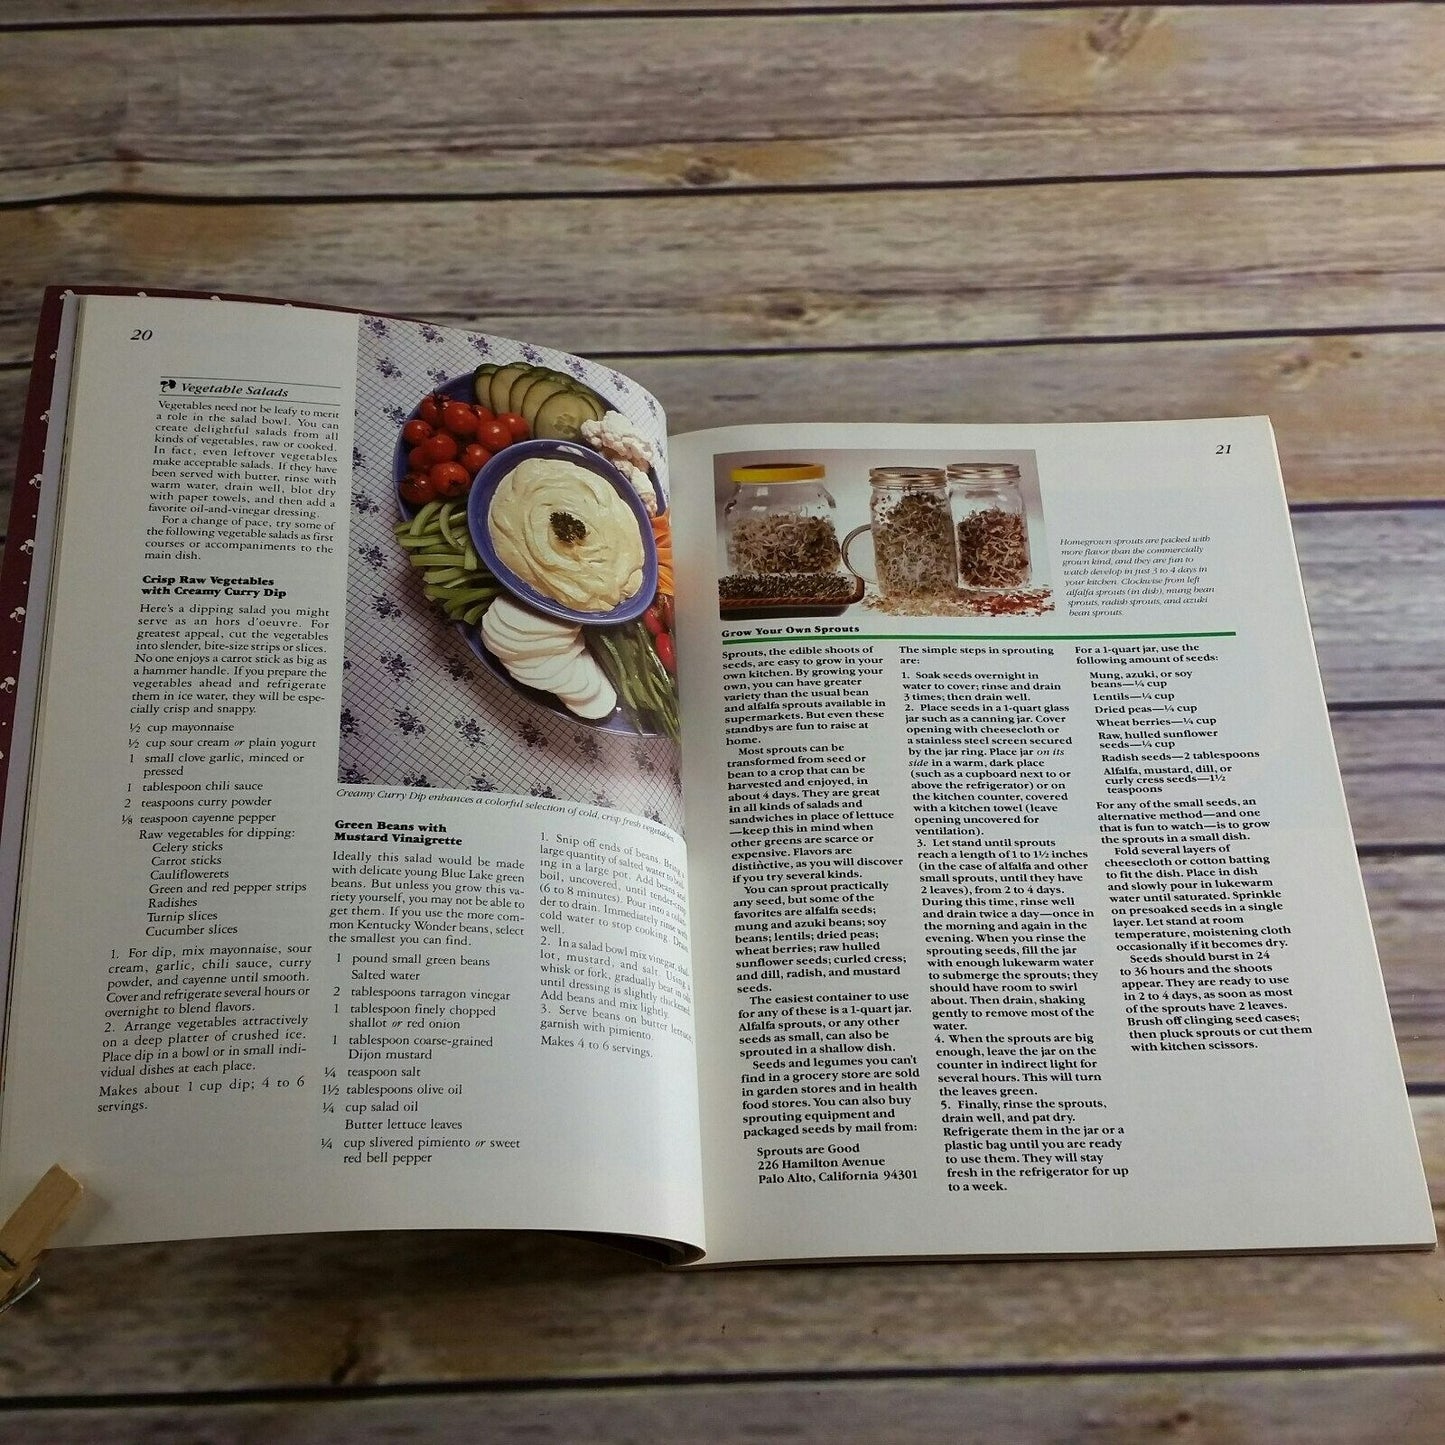 Vintage Cookbook Complete Book of Salads Recipes Food 1981 Ortho Books Chevron Chemical Paperback 175 Easy Salad Recipes